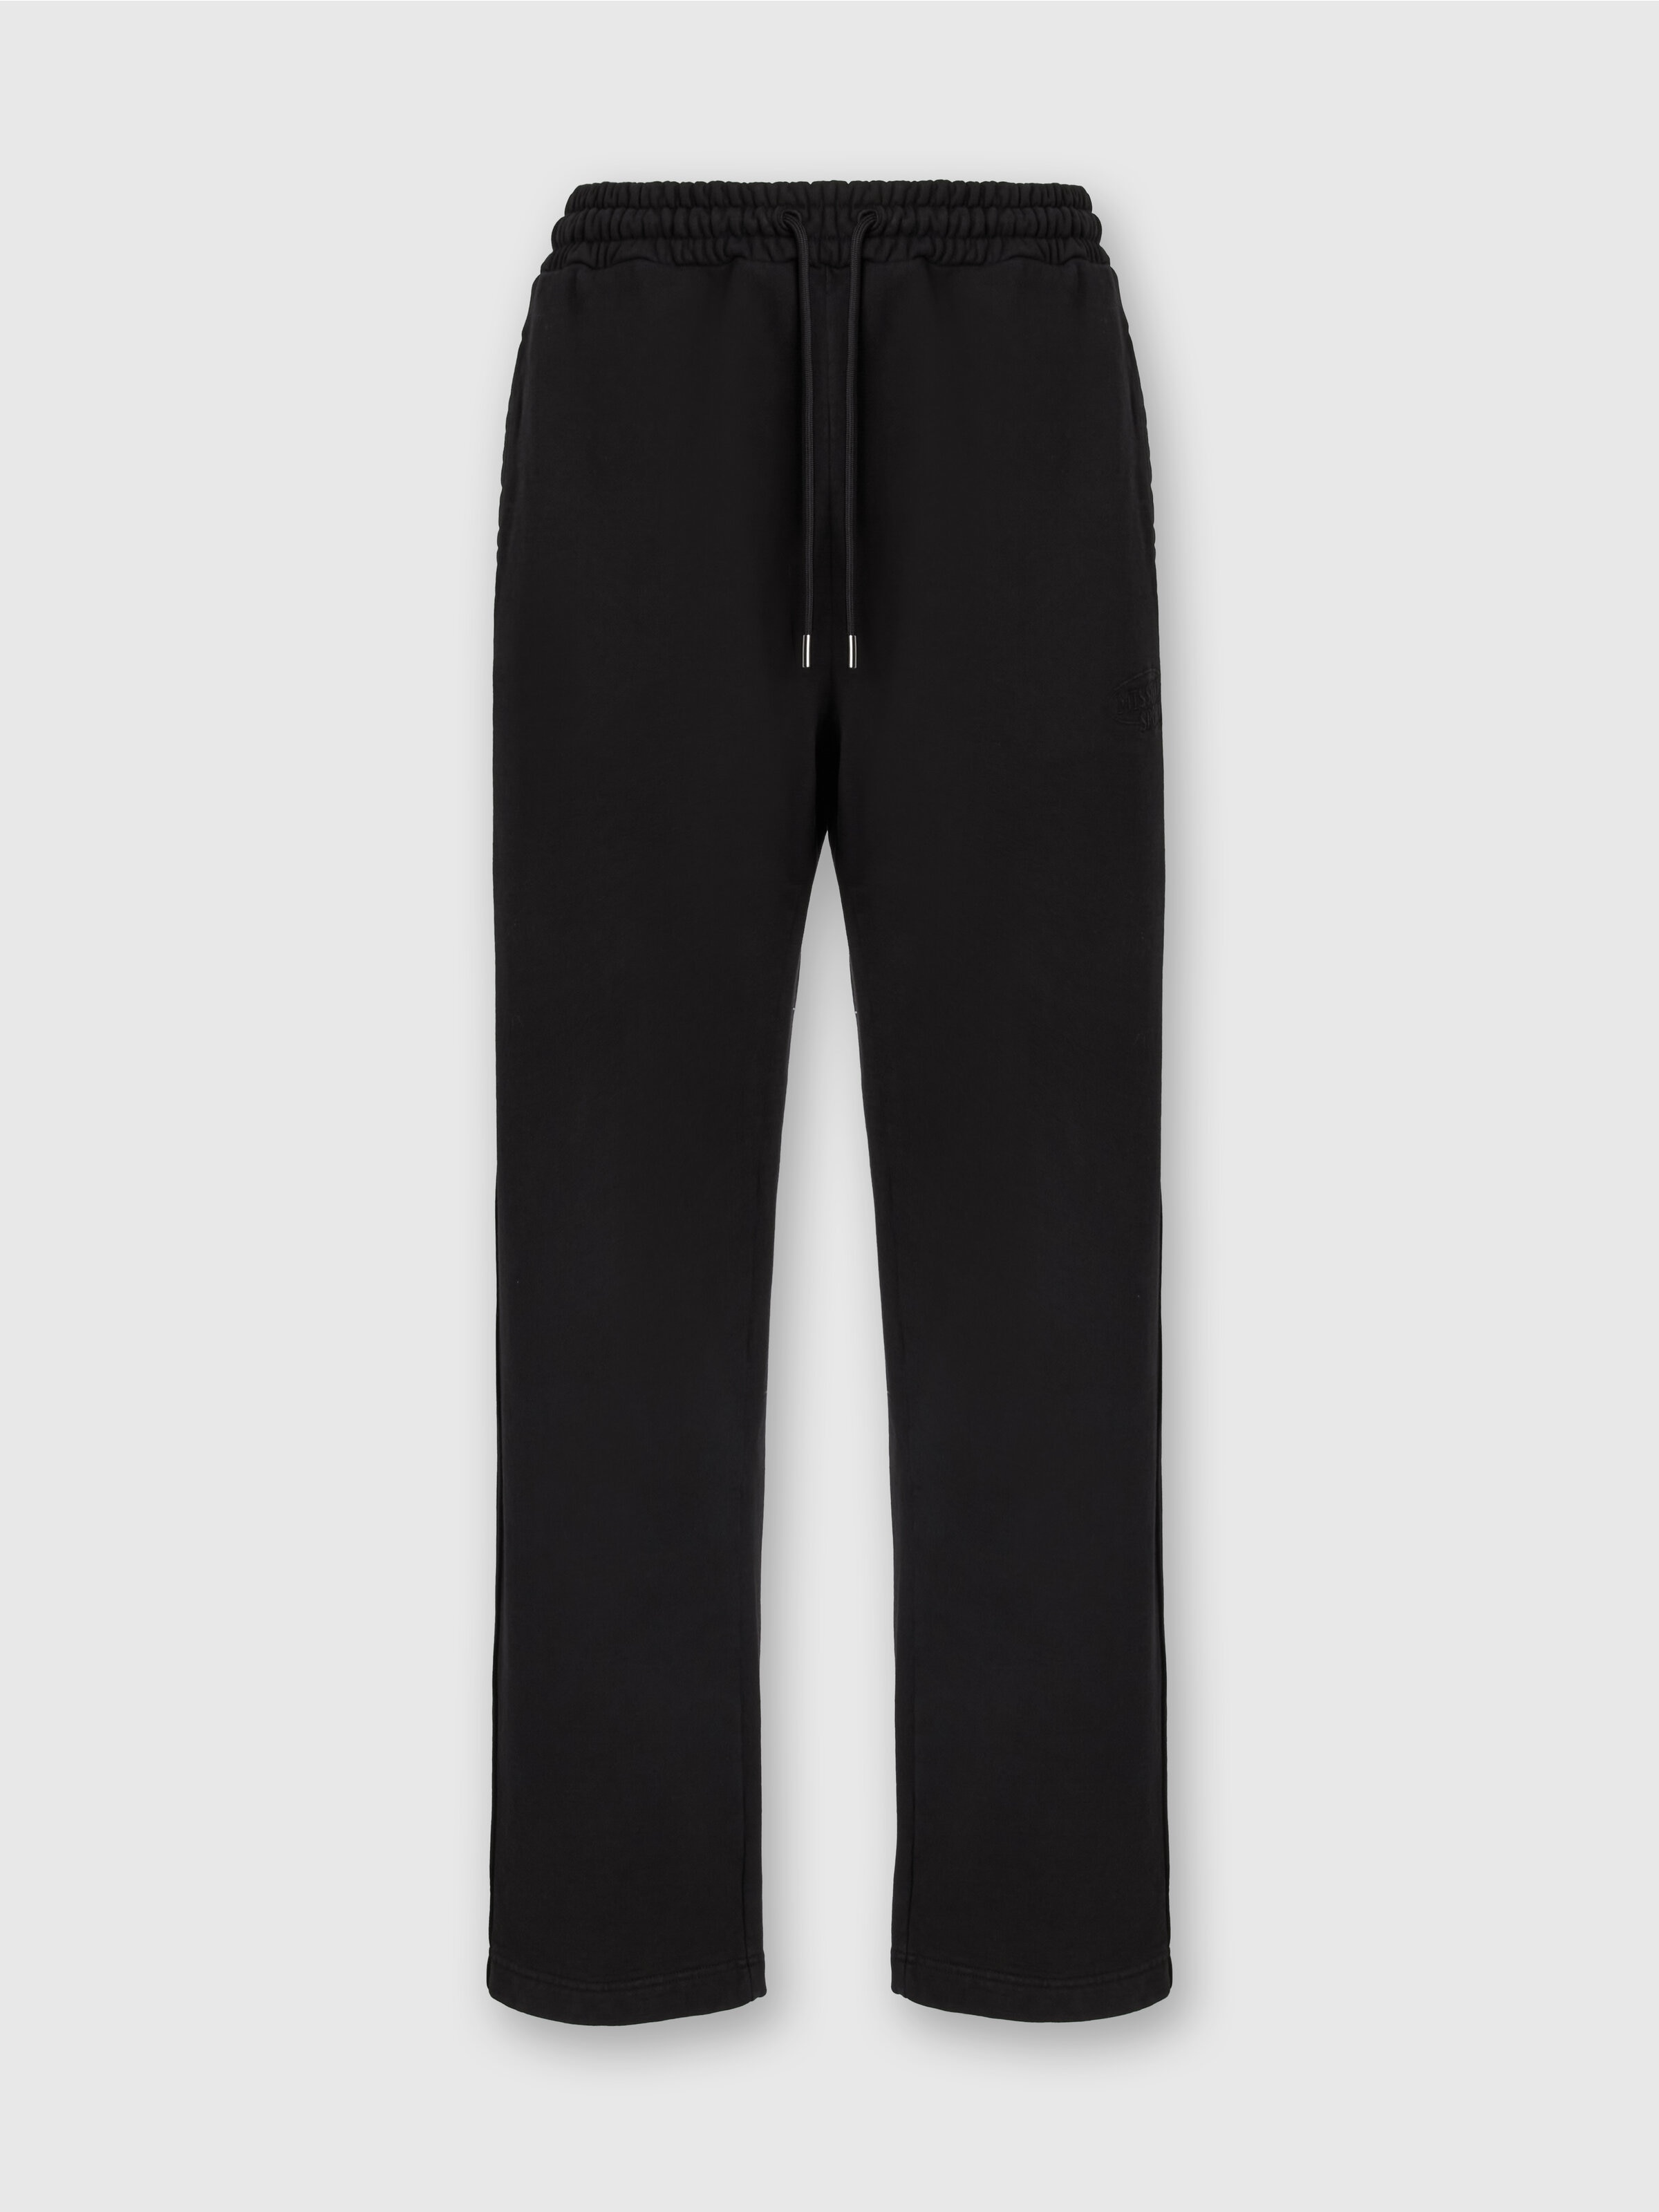 Trousers in cotton fleece with logo, Black    - 0